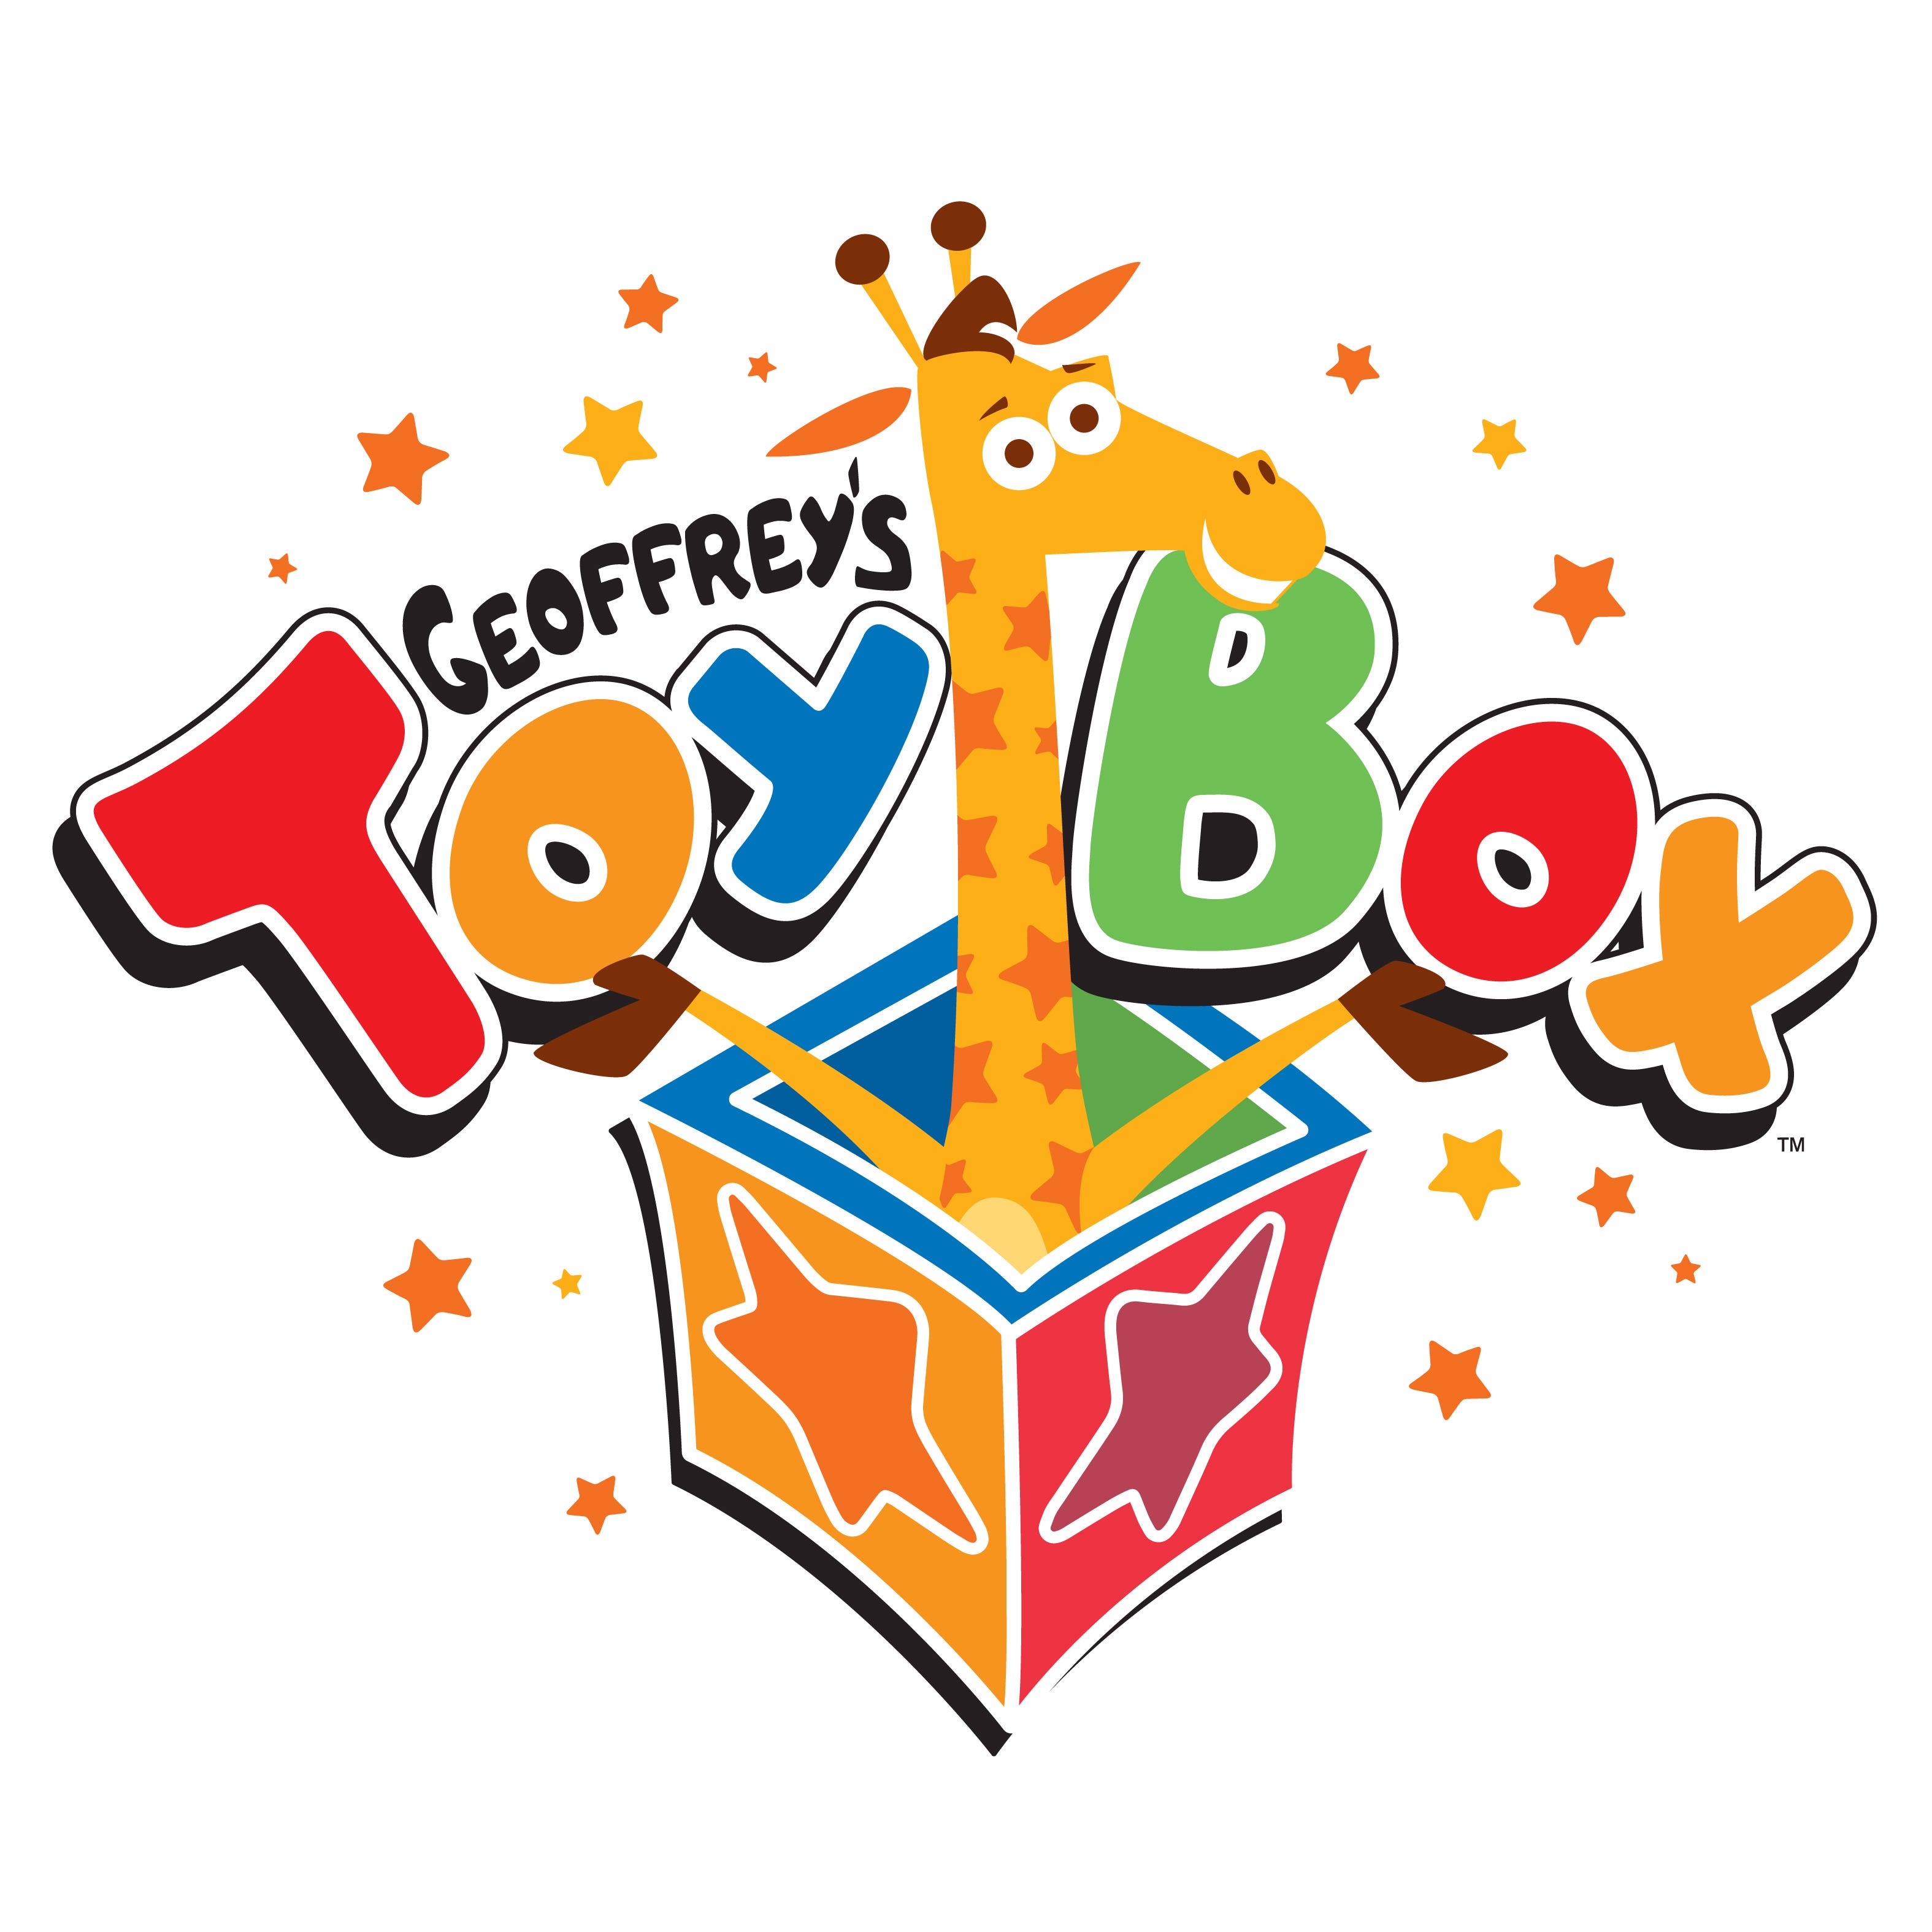 the toy box toy store